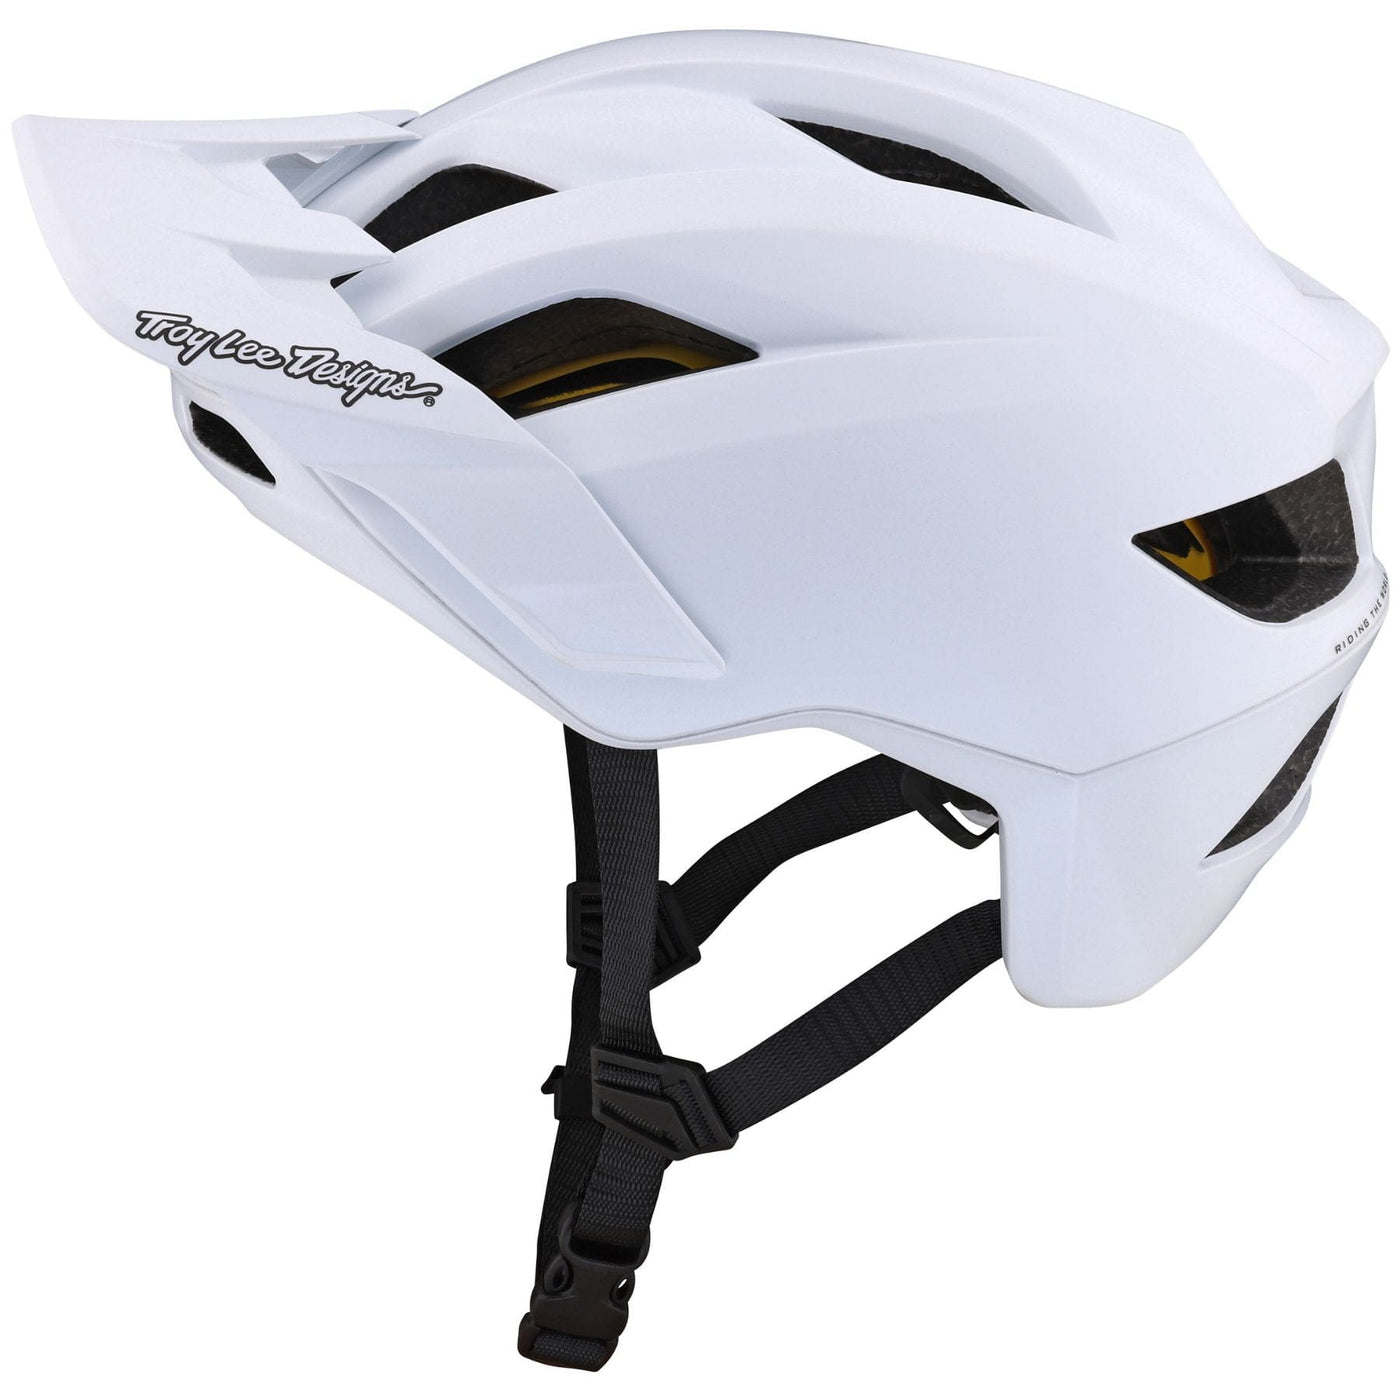 Troy Lee Designs FLOWLINE Helmet with MIPS - White 8Lines Shop - Fast Shipping